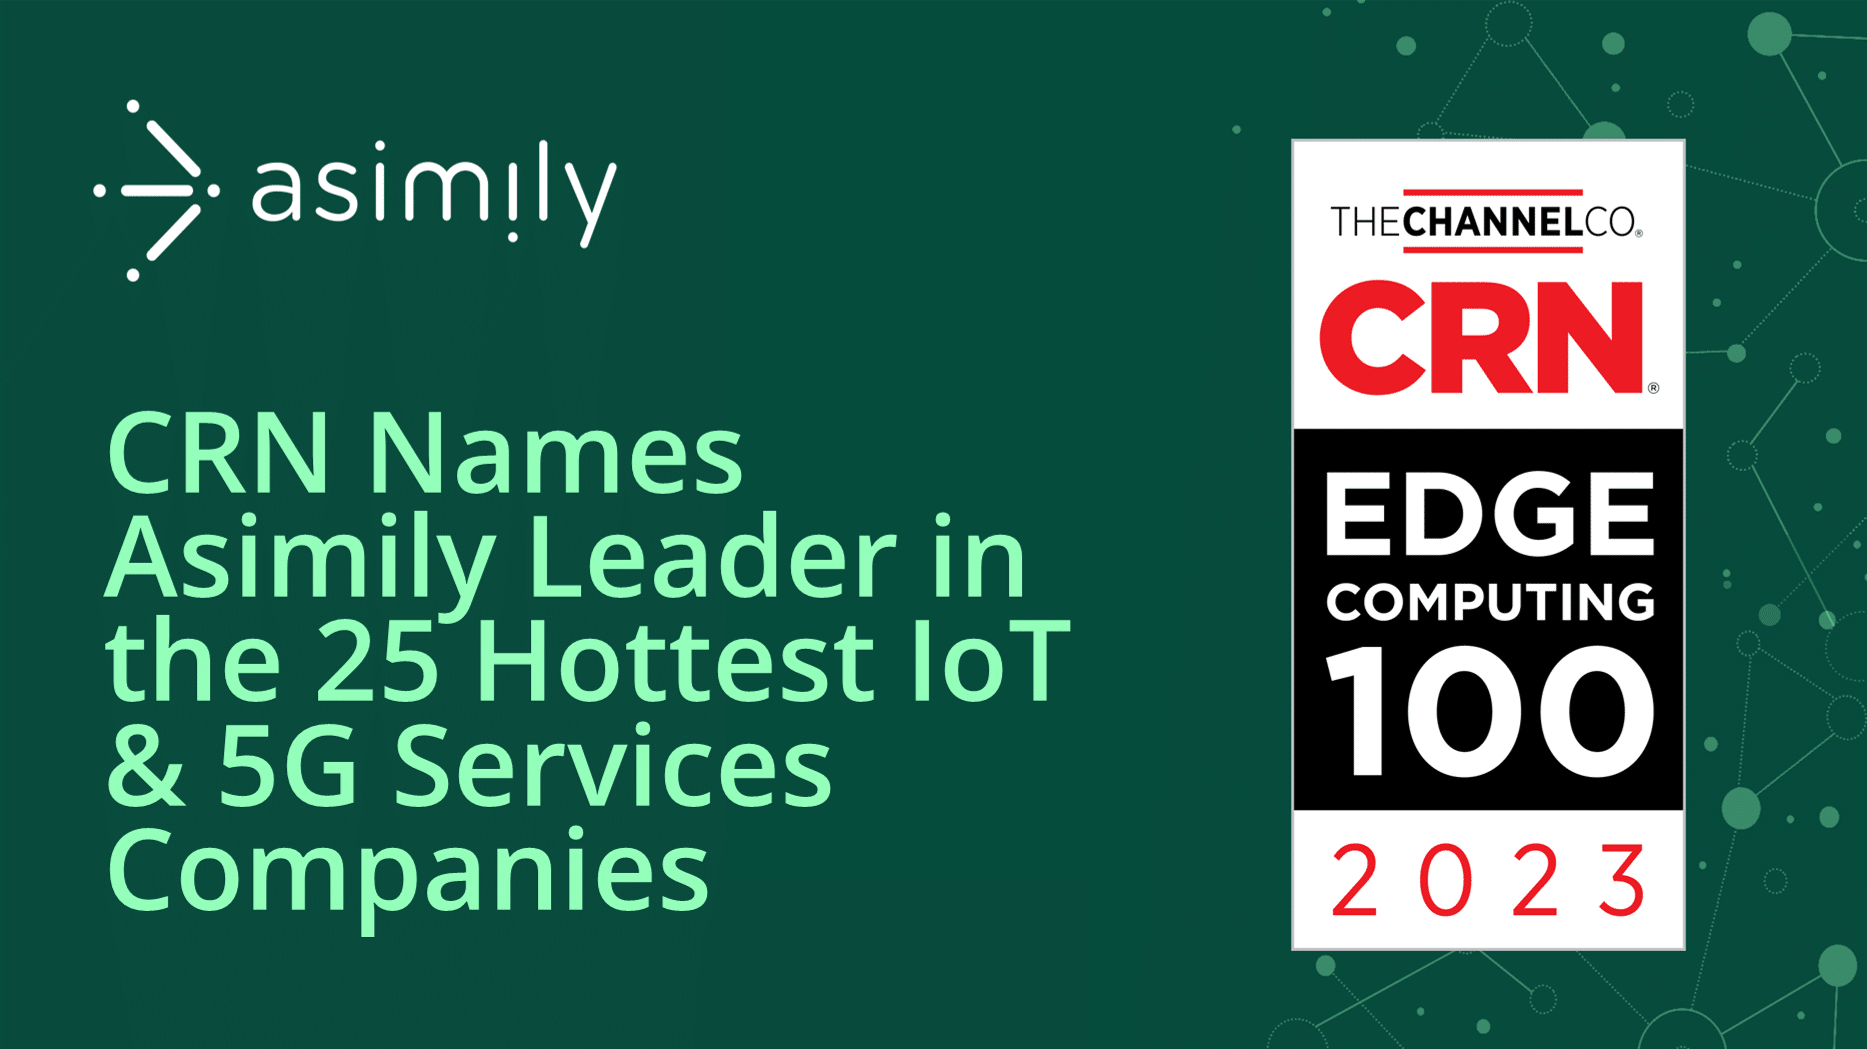 CRN Names Asimily Leader in the 25 Hottest IoT and 5G Services Companies